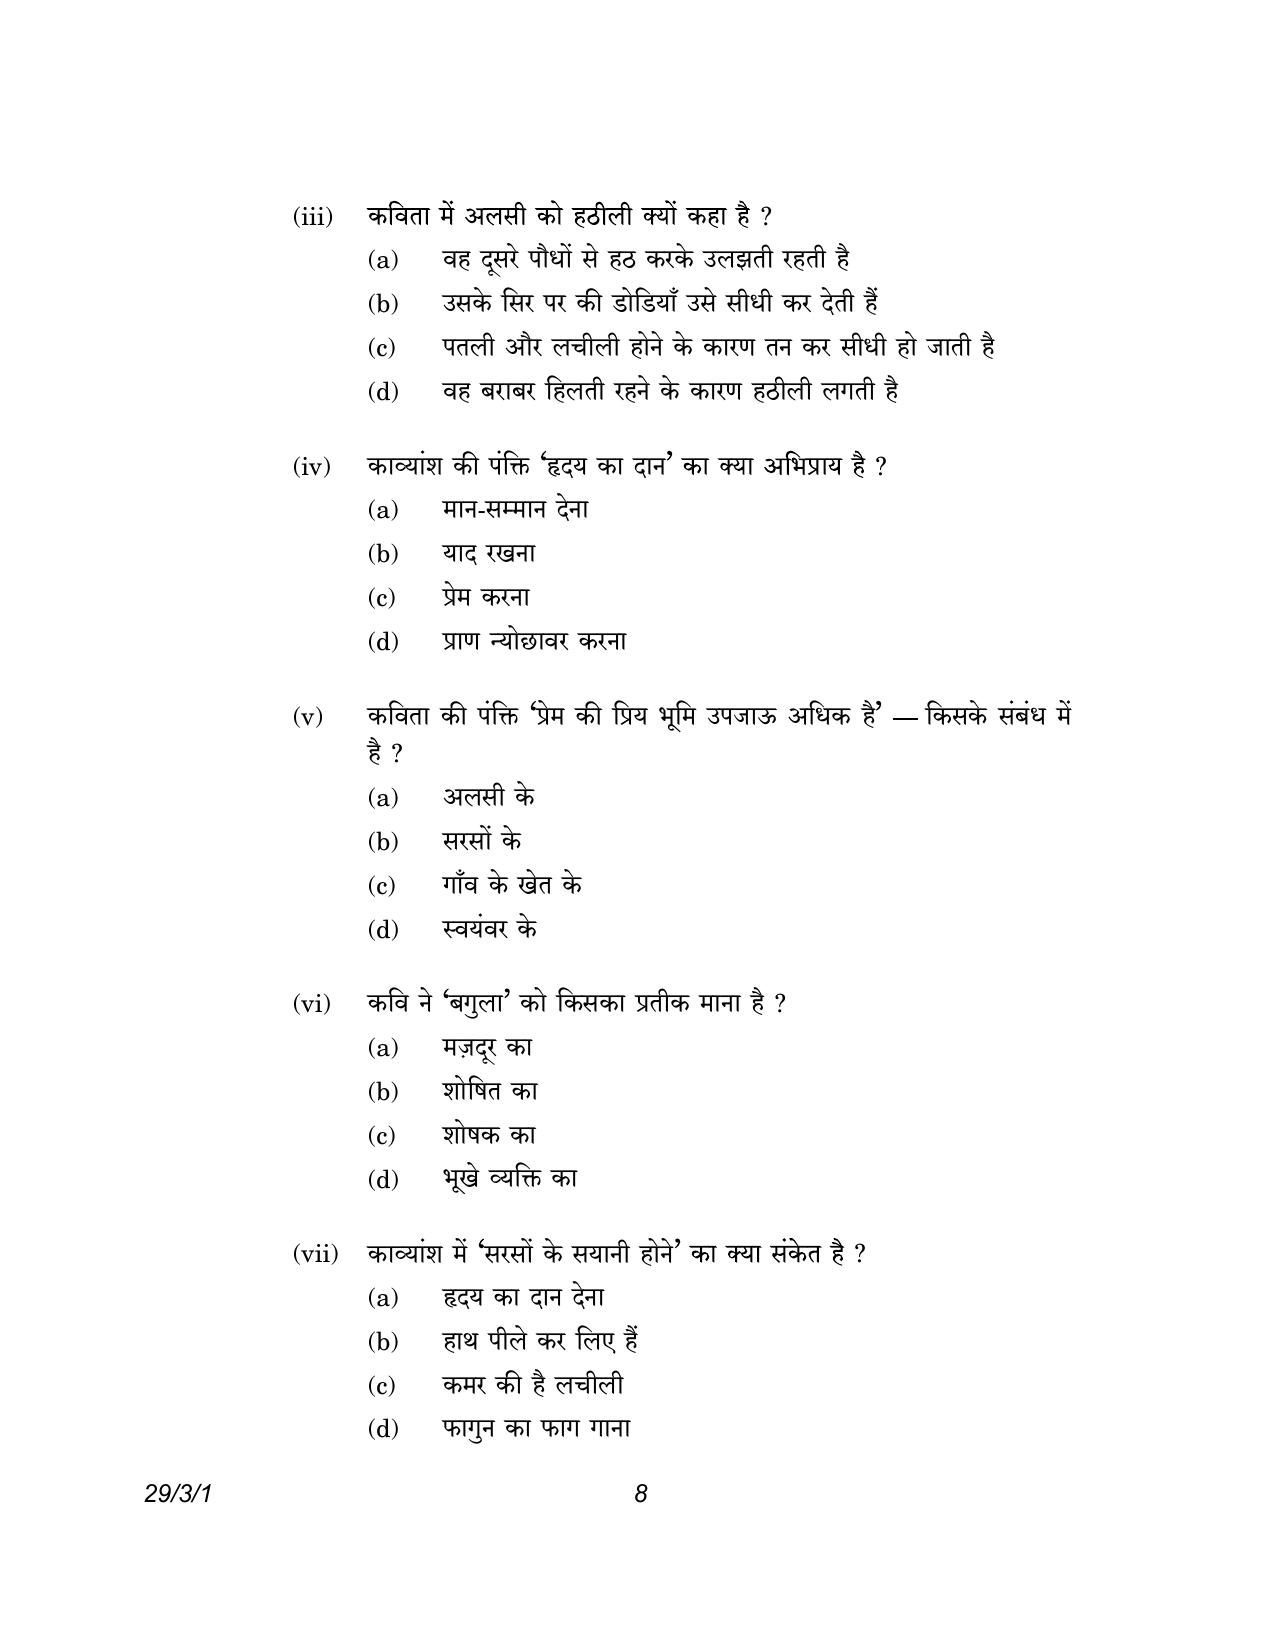 CBSE Class 12 29-3-1 Hindi Elective 2023 Question Paper - Page 8